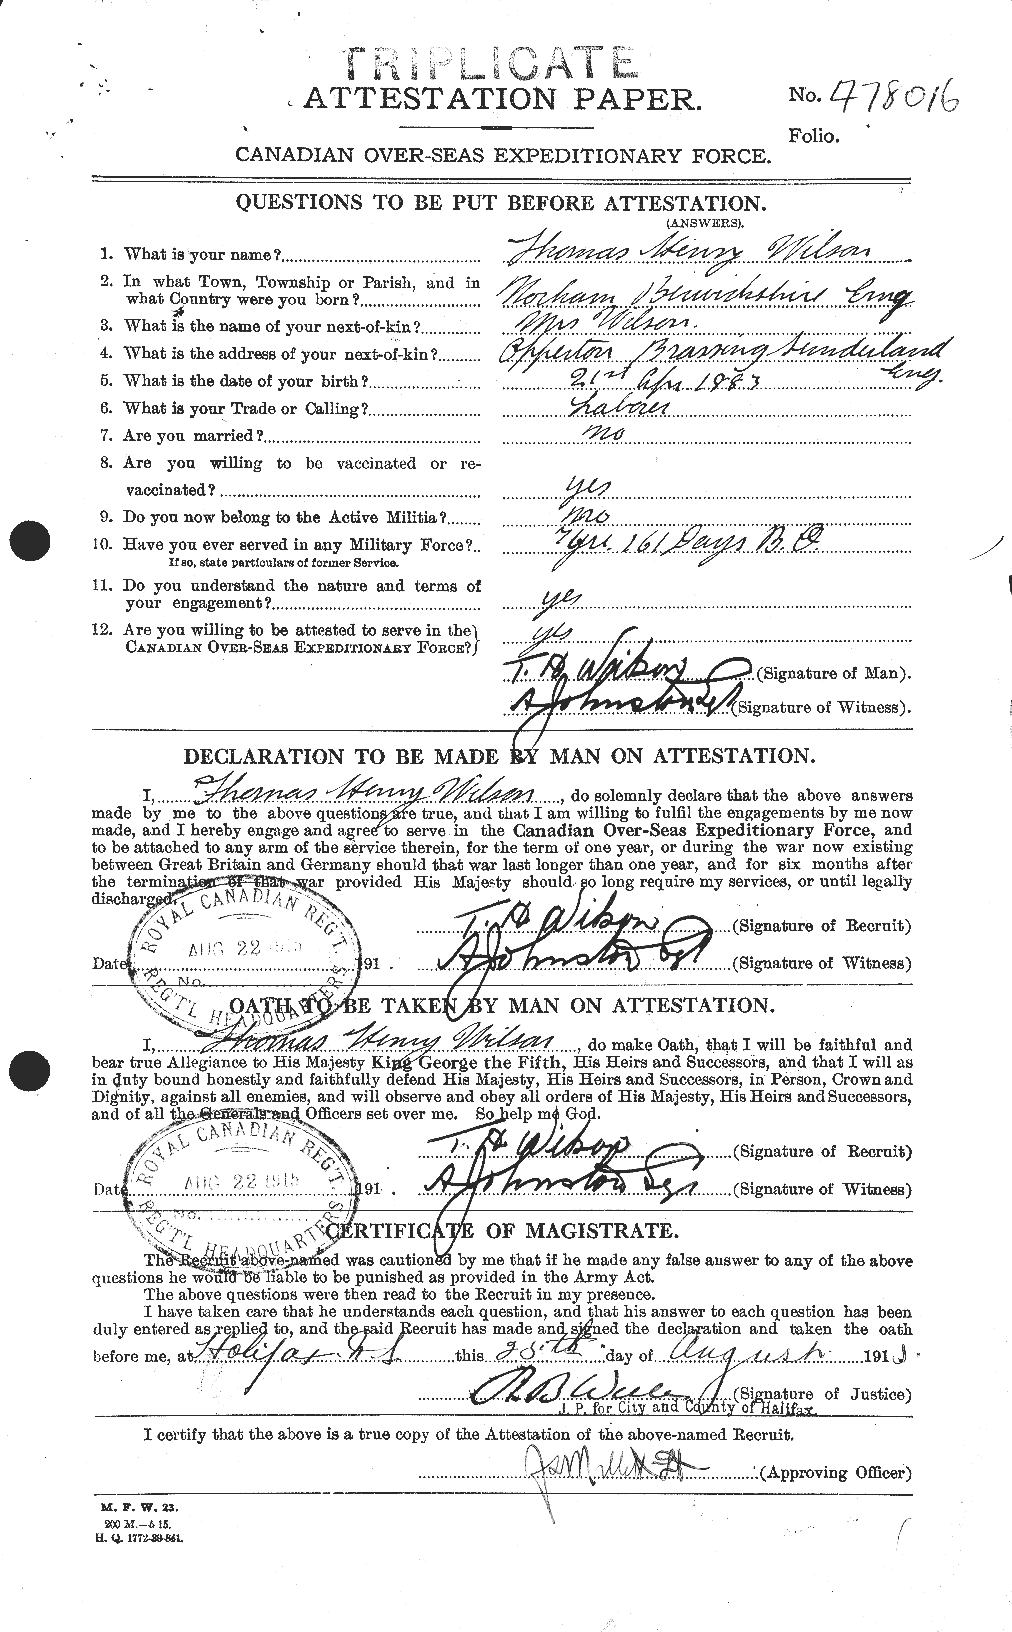 Personnel Records of the First World War - CEF 681271a